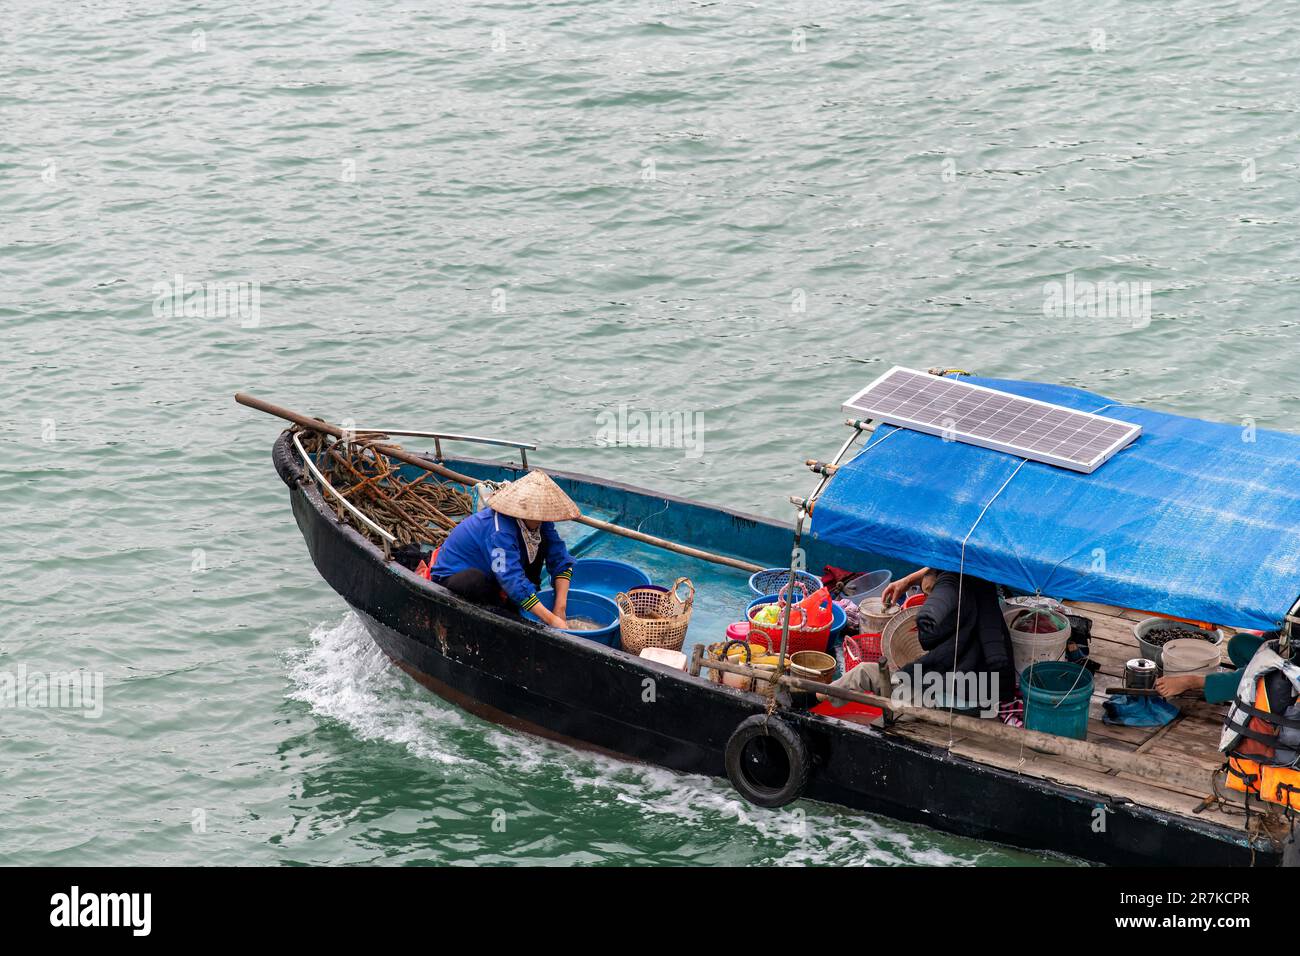 High angle close up view of a small wooden fishing boat in water of Halong Bay, Vietnam with woman with straw hat taking care of catch of the day Stock Photo